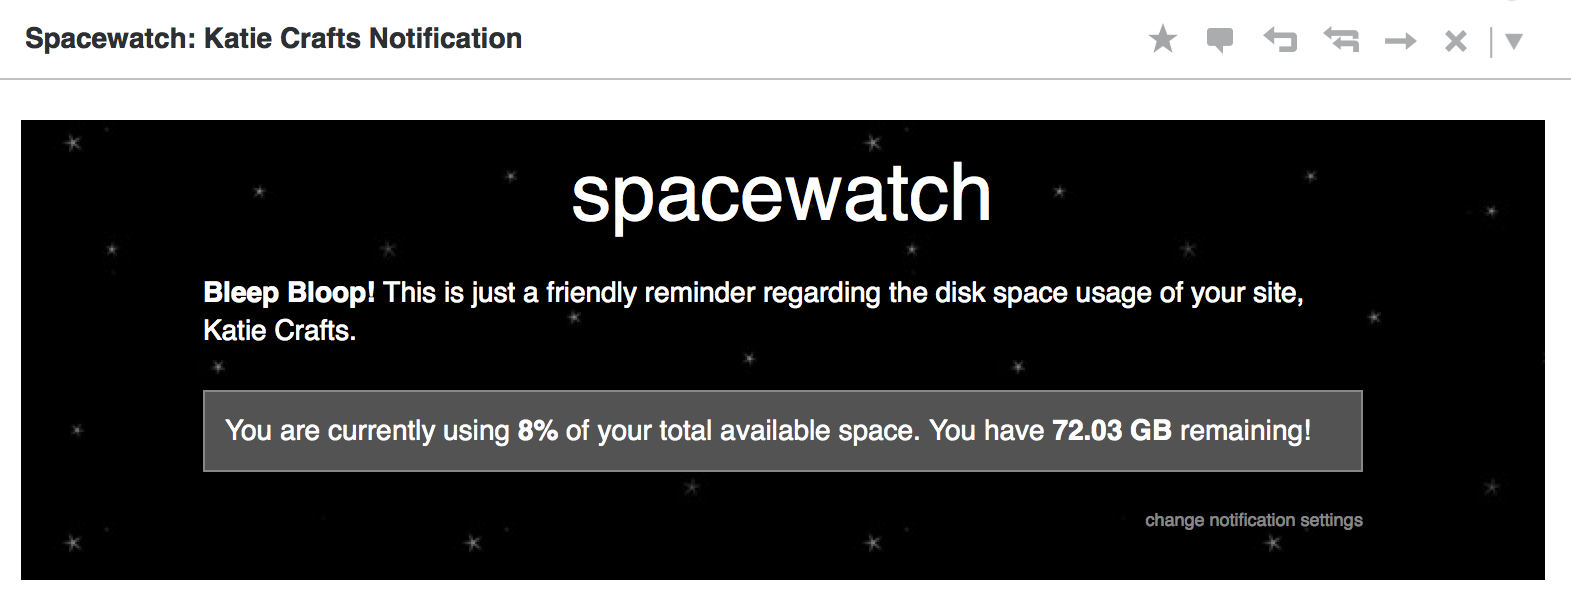 This is what the notification email looks like. The Spacewatch Robot cares.